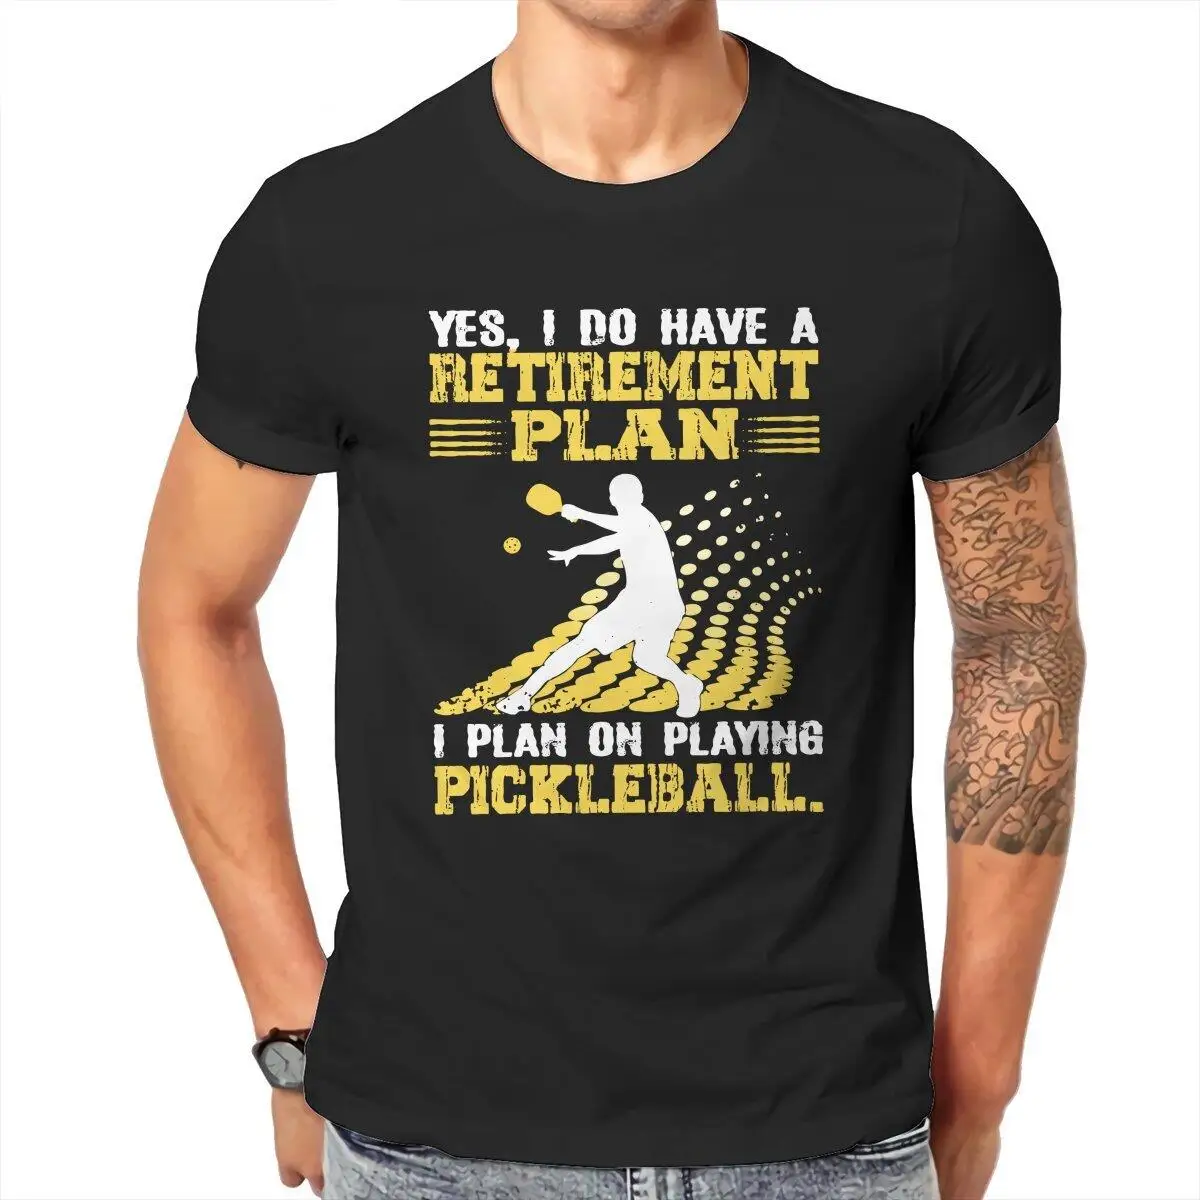 Retirement Plan On Playing Pickleball  Men's T Shirt  Humorous Tees Short Sleeve Crew Neck T-Shirts 100% Cotton Plus Size Tops